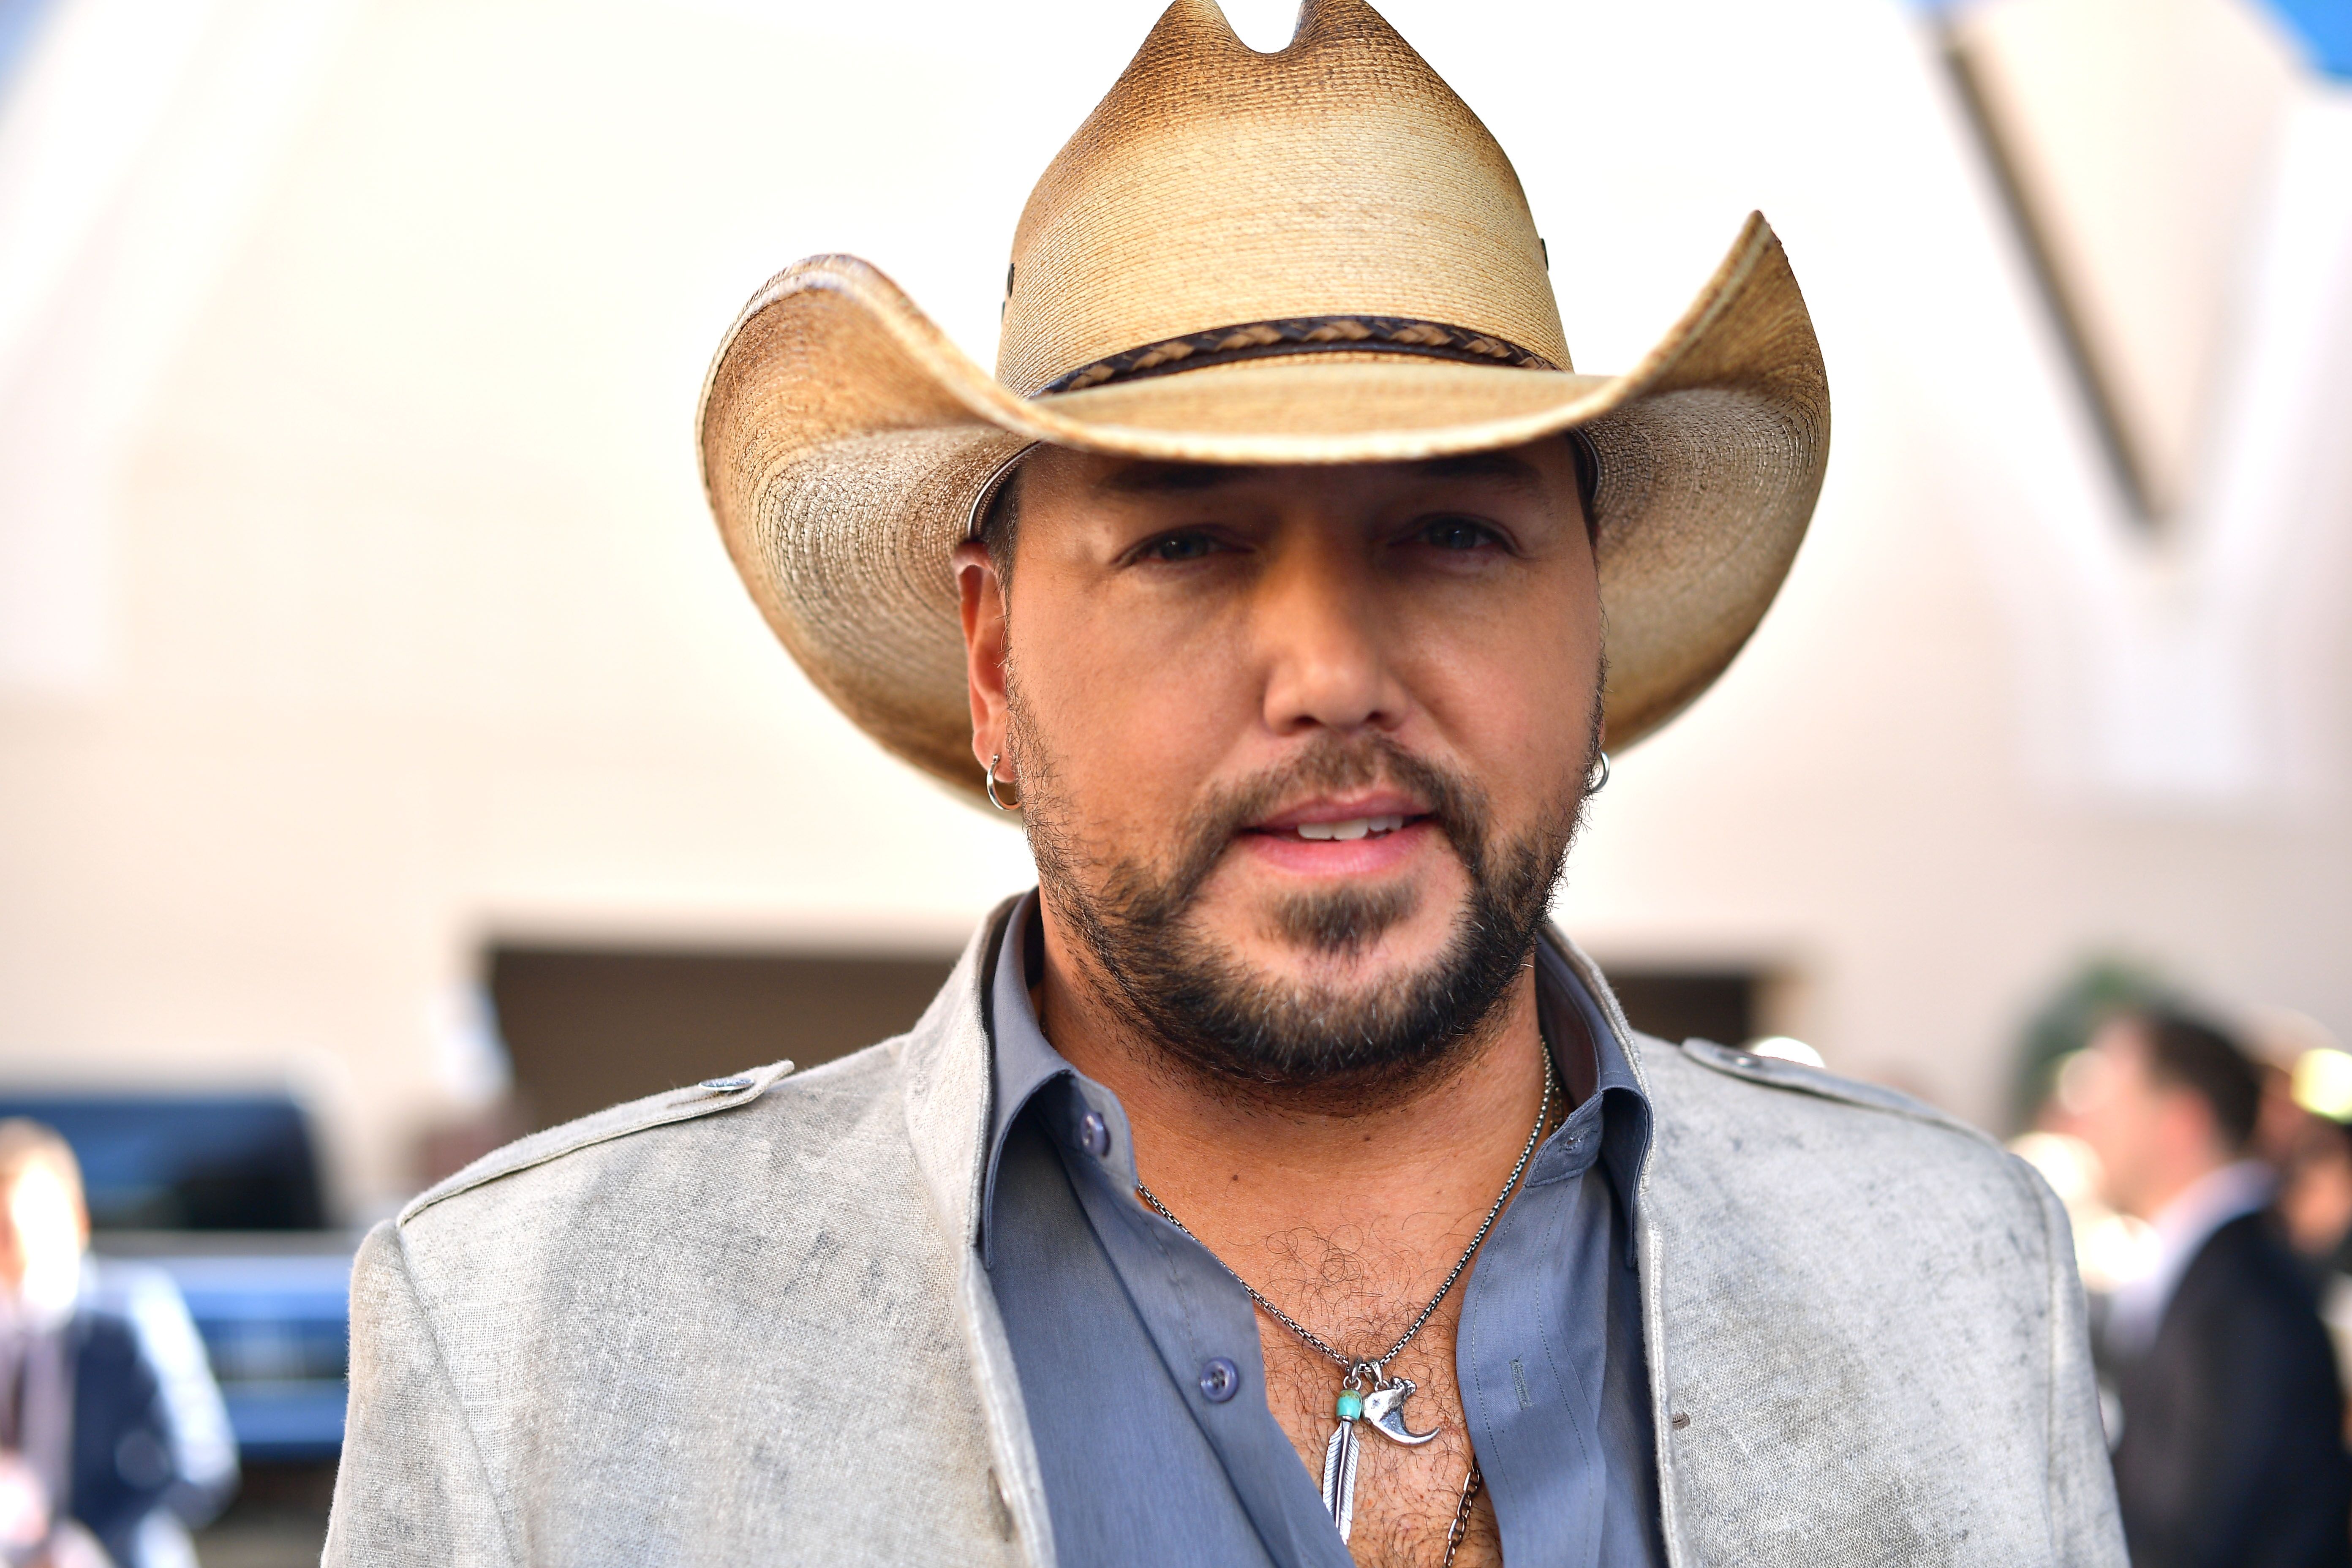 Jason Aldean at the 54th Academy Of Country Music Awards on April 07, 2019 in Las Vegas, Nevada | Photo: Matt Winkelmeyer Getty Images